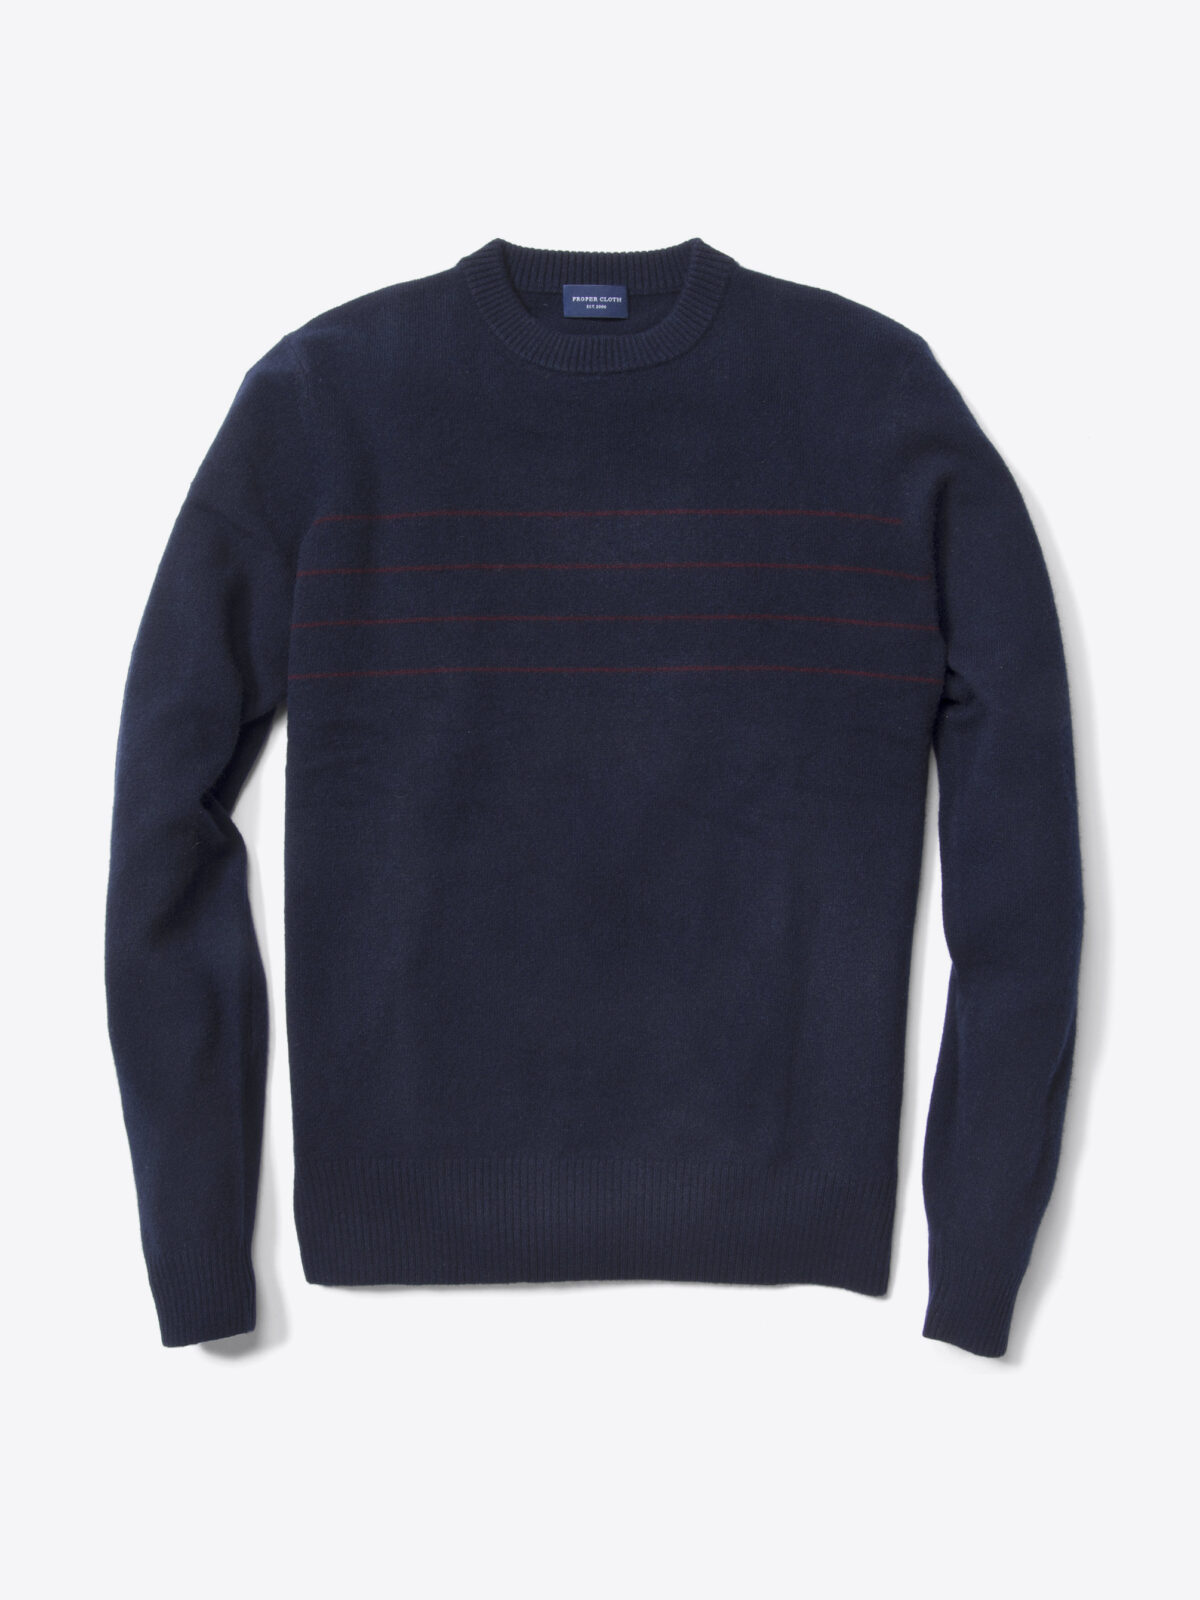 Navy and Red Stripe Cashmere Sweater